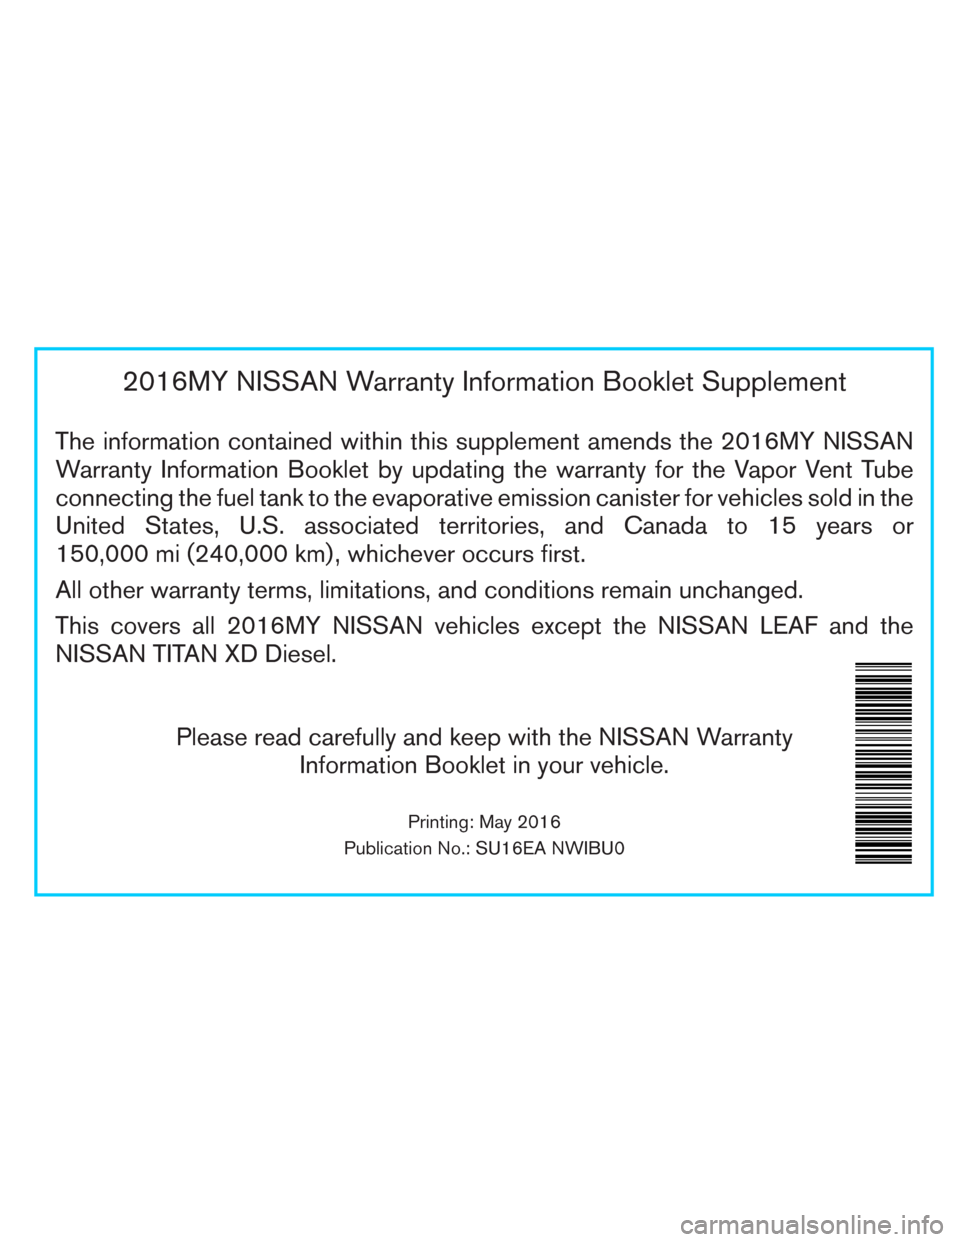 NISSAN ALTIMA 2016 L33 / 5.G Warranty Booklet 2016MY NISSAN Warranty Information Booklet Supplement
The information contained within this supplement amends the 2016MY NISSAN
Warranty Information Booklet by updating the warranty for the Vapor Vent